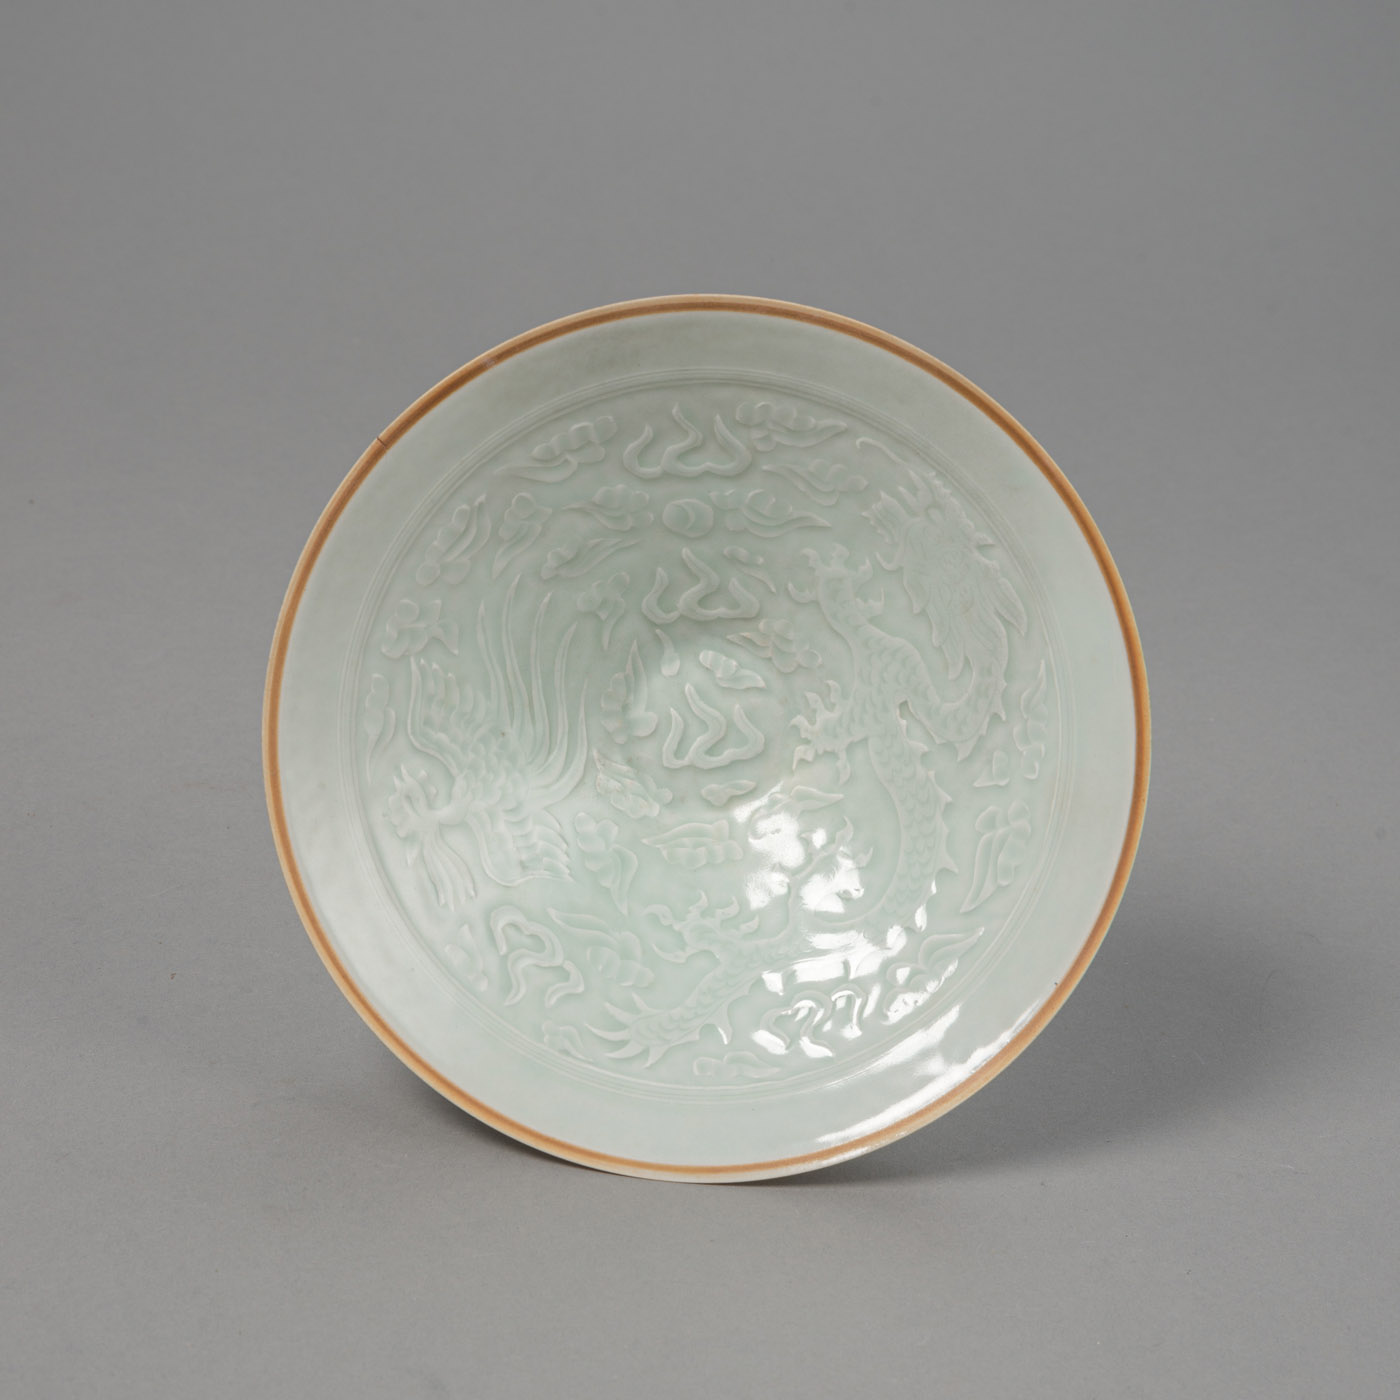 <b>A VERY THIN-WALLED CONICAL QINGBAI' GLAZED PORCELAIN BOWL DEPICTING A PAIR OF DRAGON AND PHOENIX IN RELIEF, BOTTOM AND RIM UNGLAZED</b>